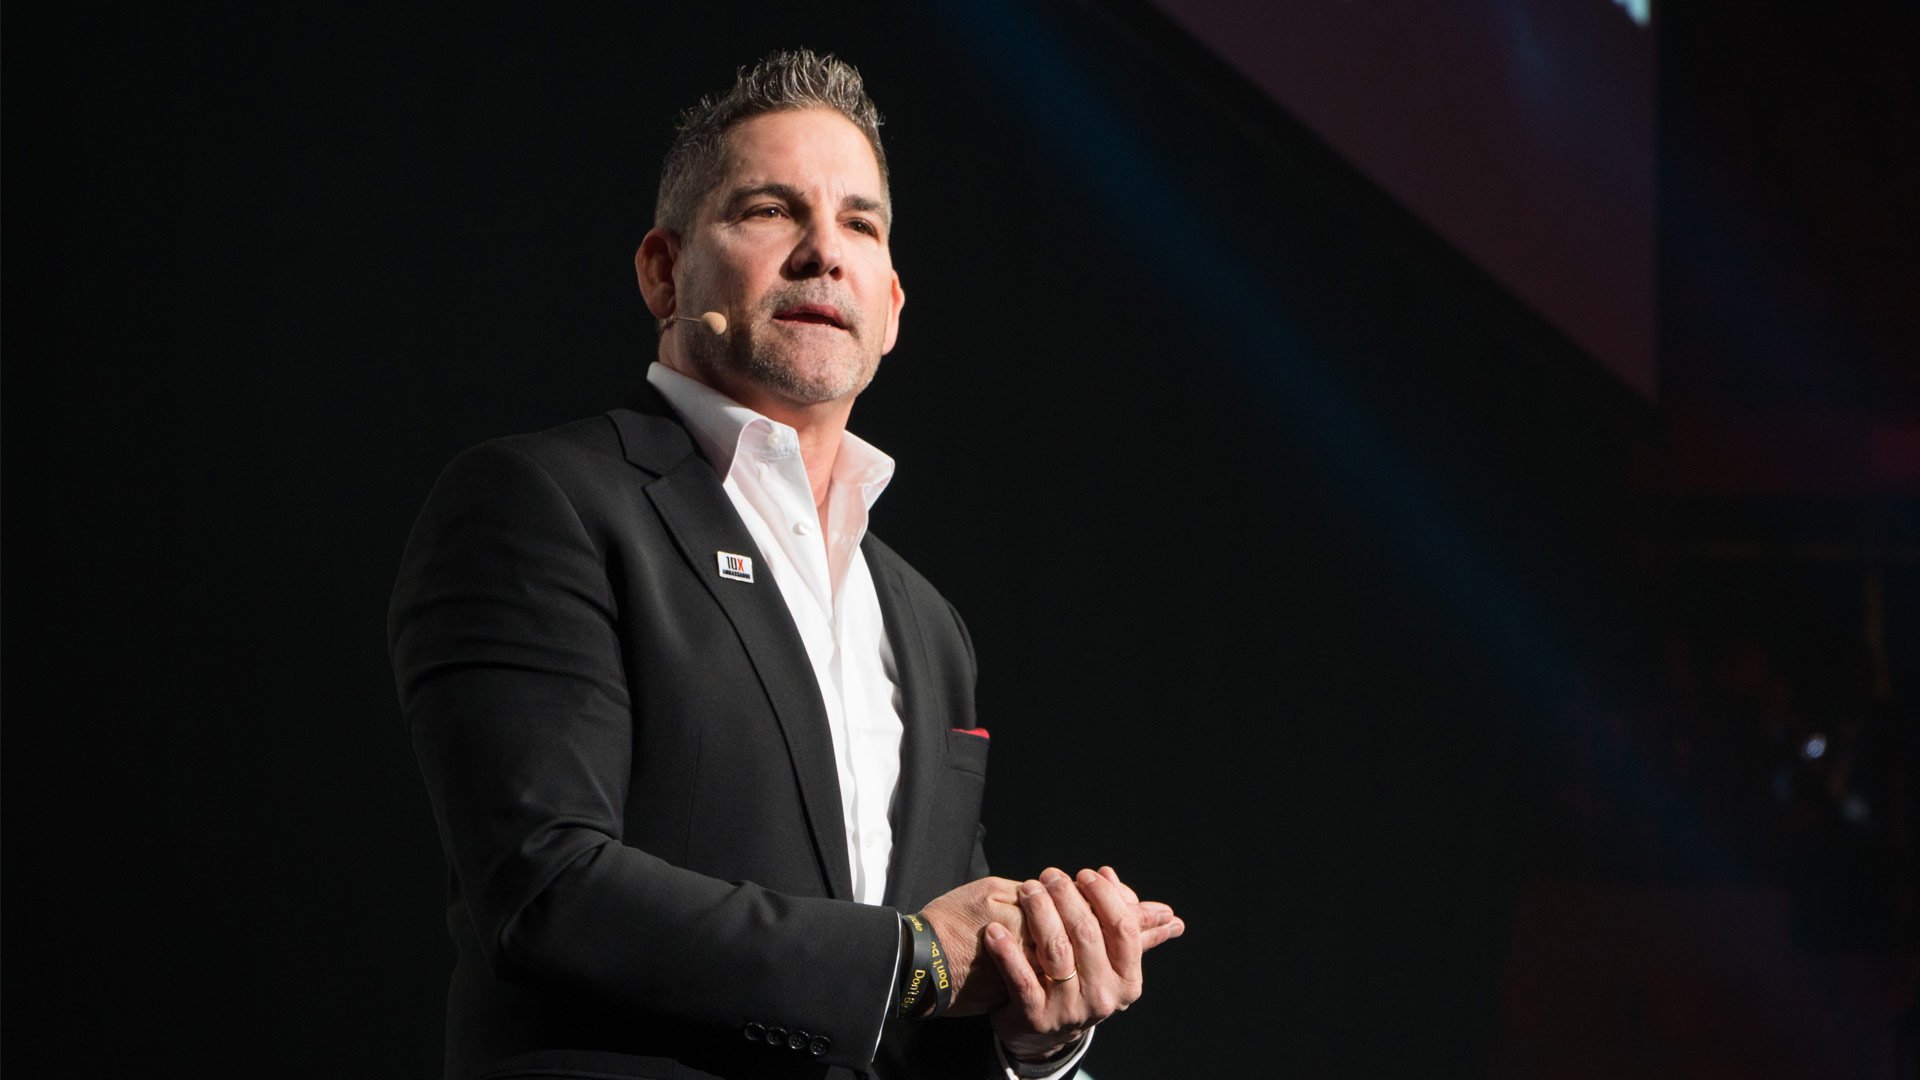 Grant Cardone Reach Your Full Potential